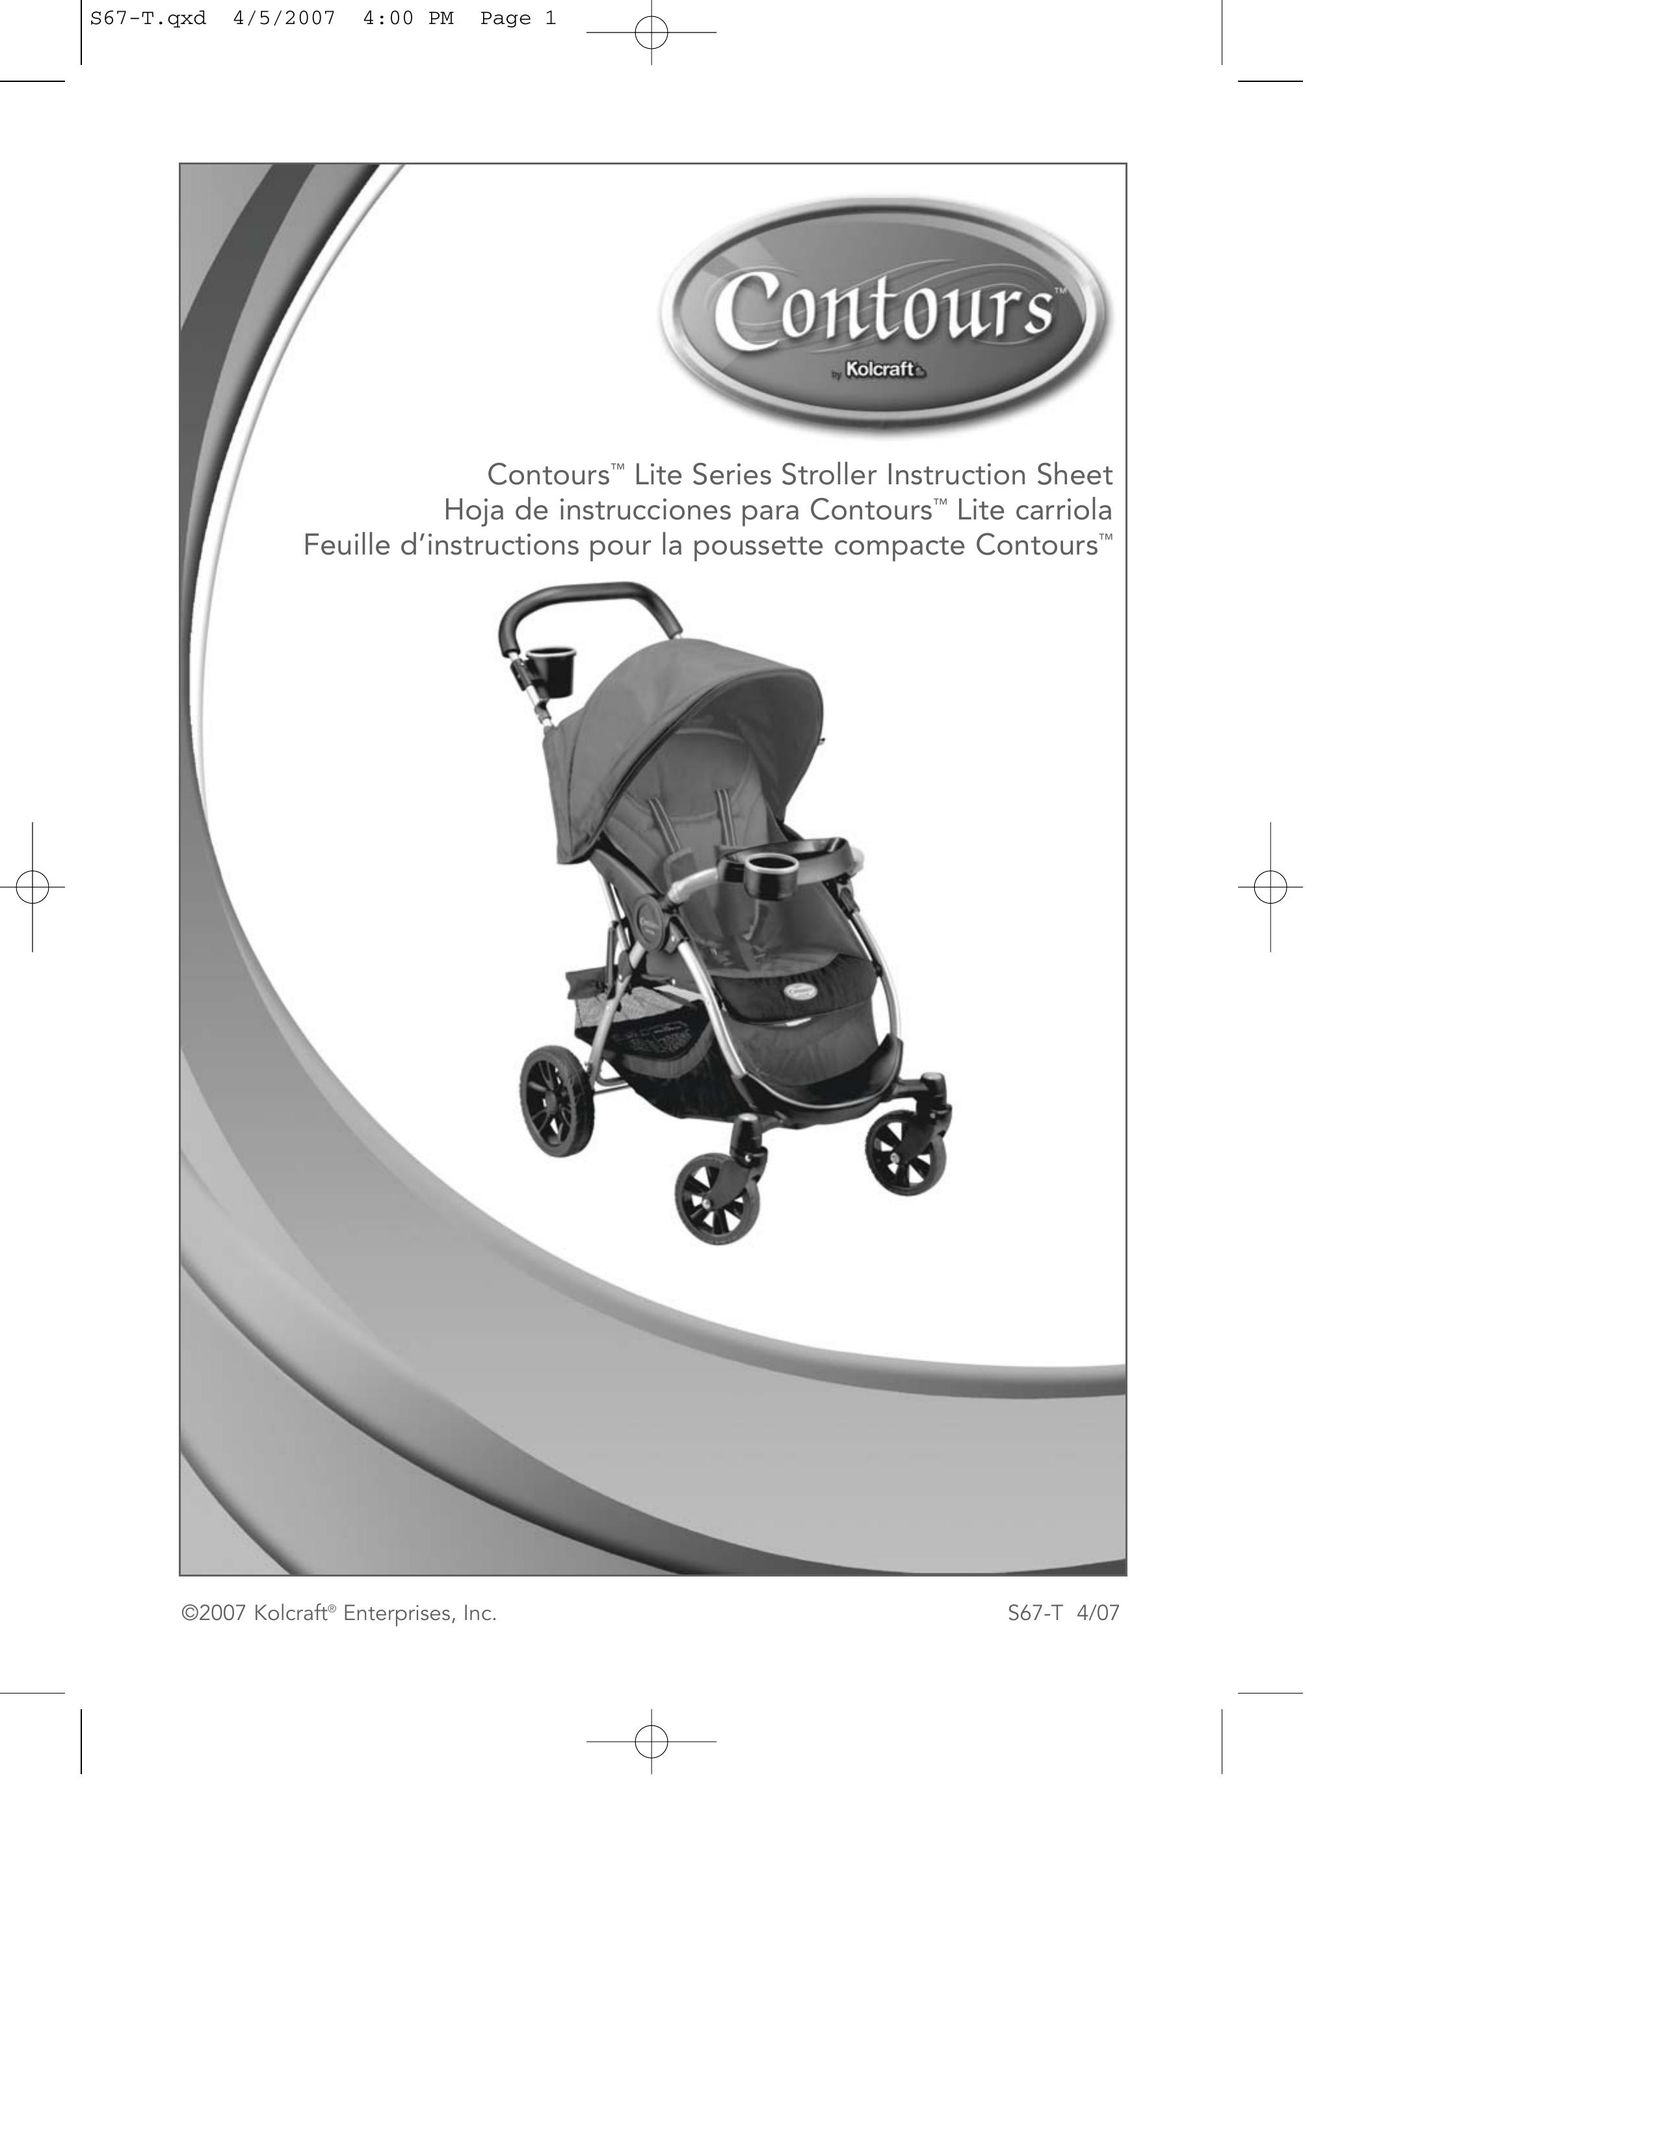 Contour Products S67-T 4/07 Stroller User Manual